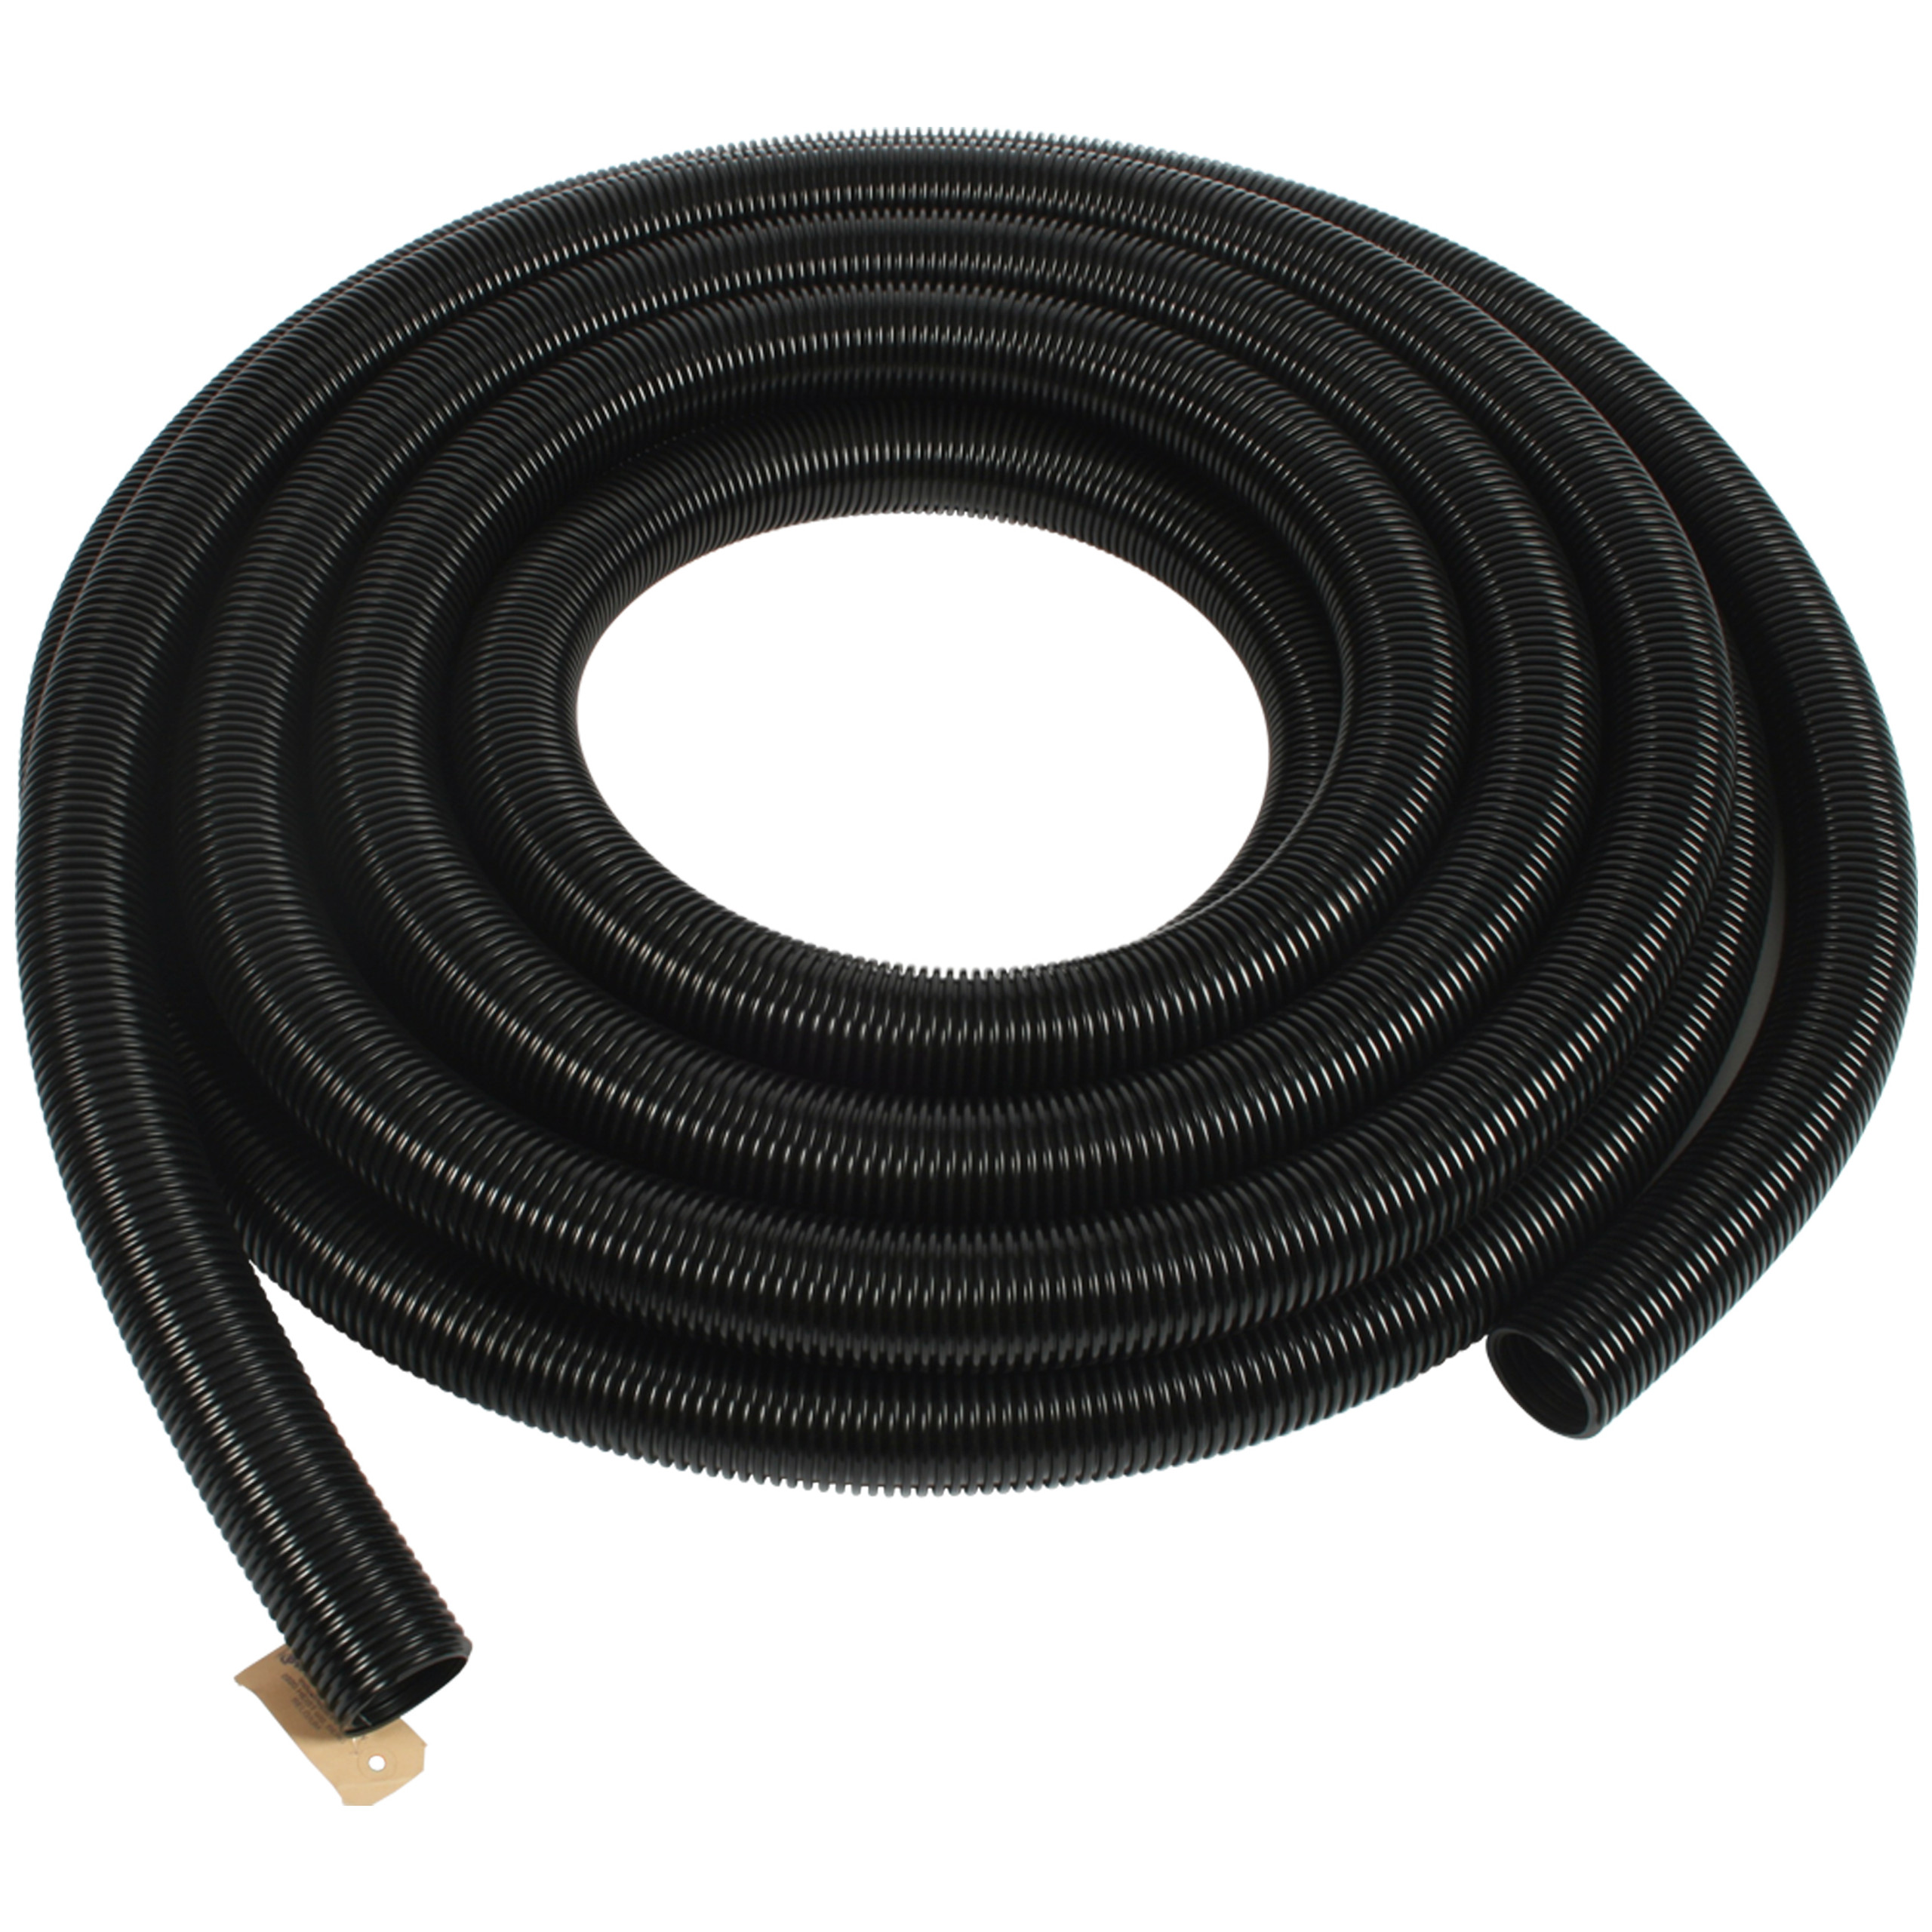 Vacuum Hoses And Cuffs 2 Inch Hose Cen Tec Systems